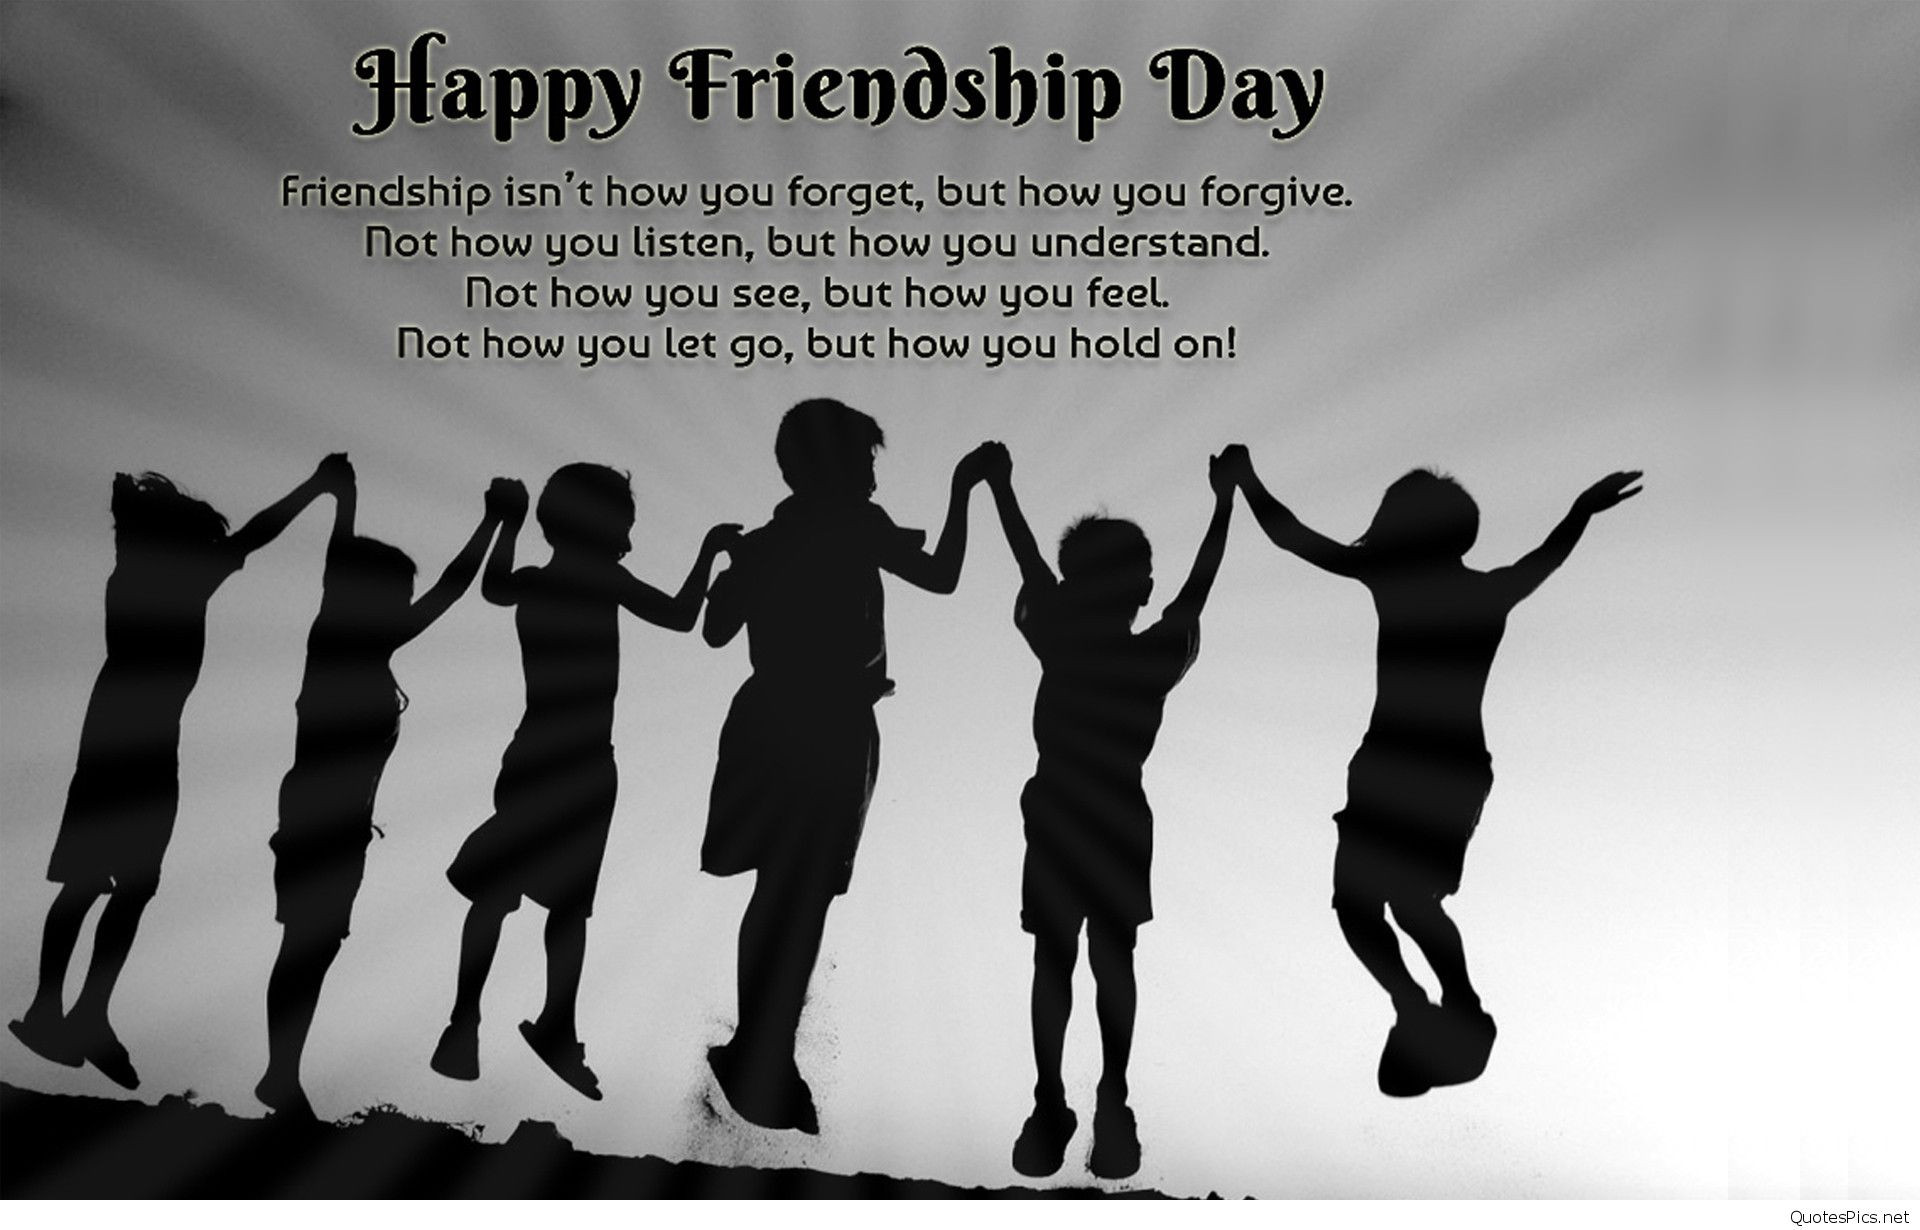 Happy Friendship Day Quotes
 Top thoughts inspirational quotes images 2016 2017